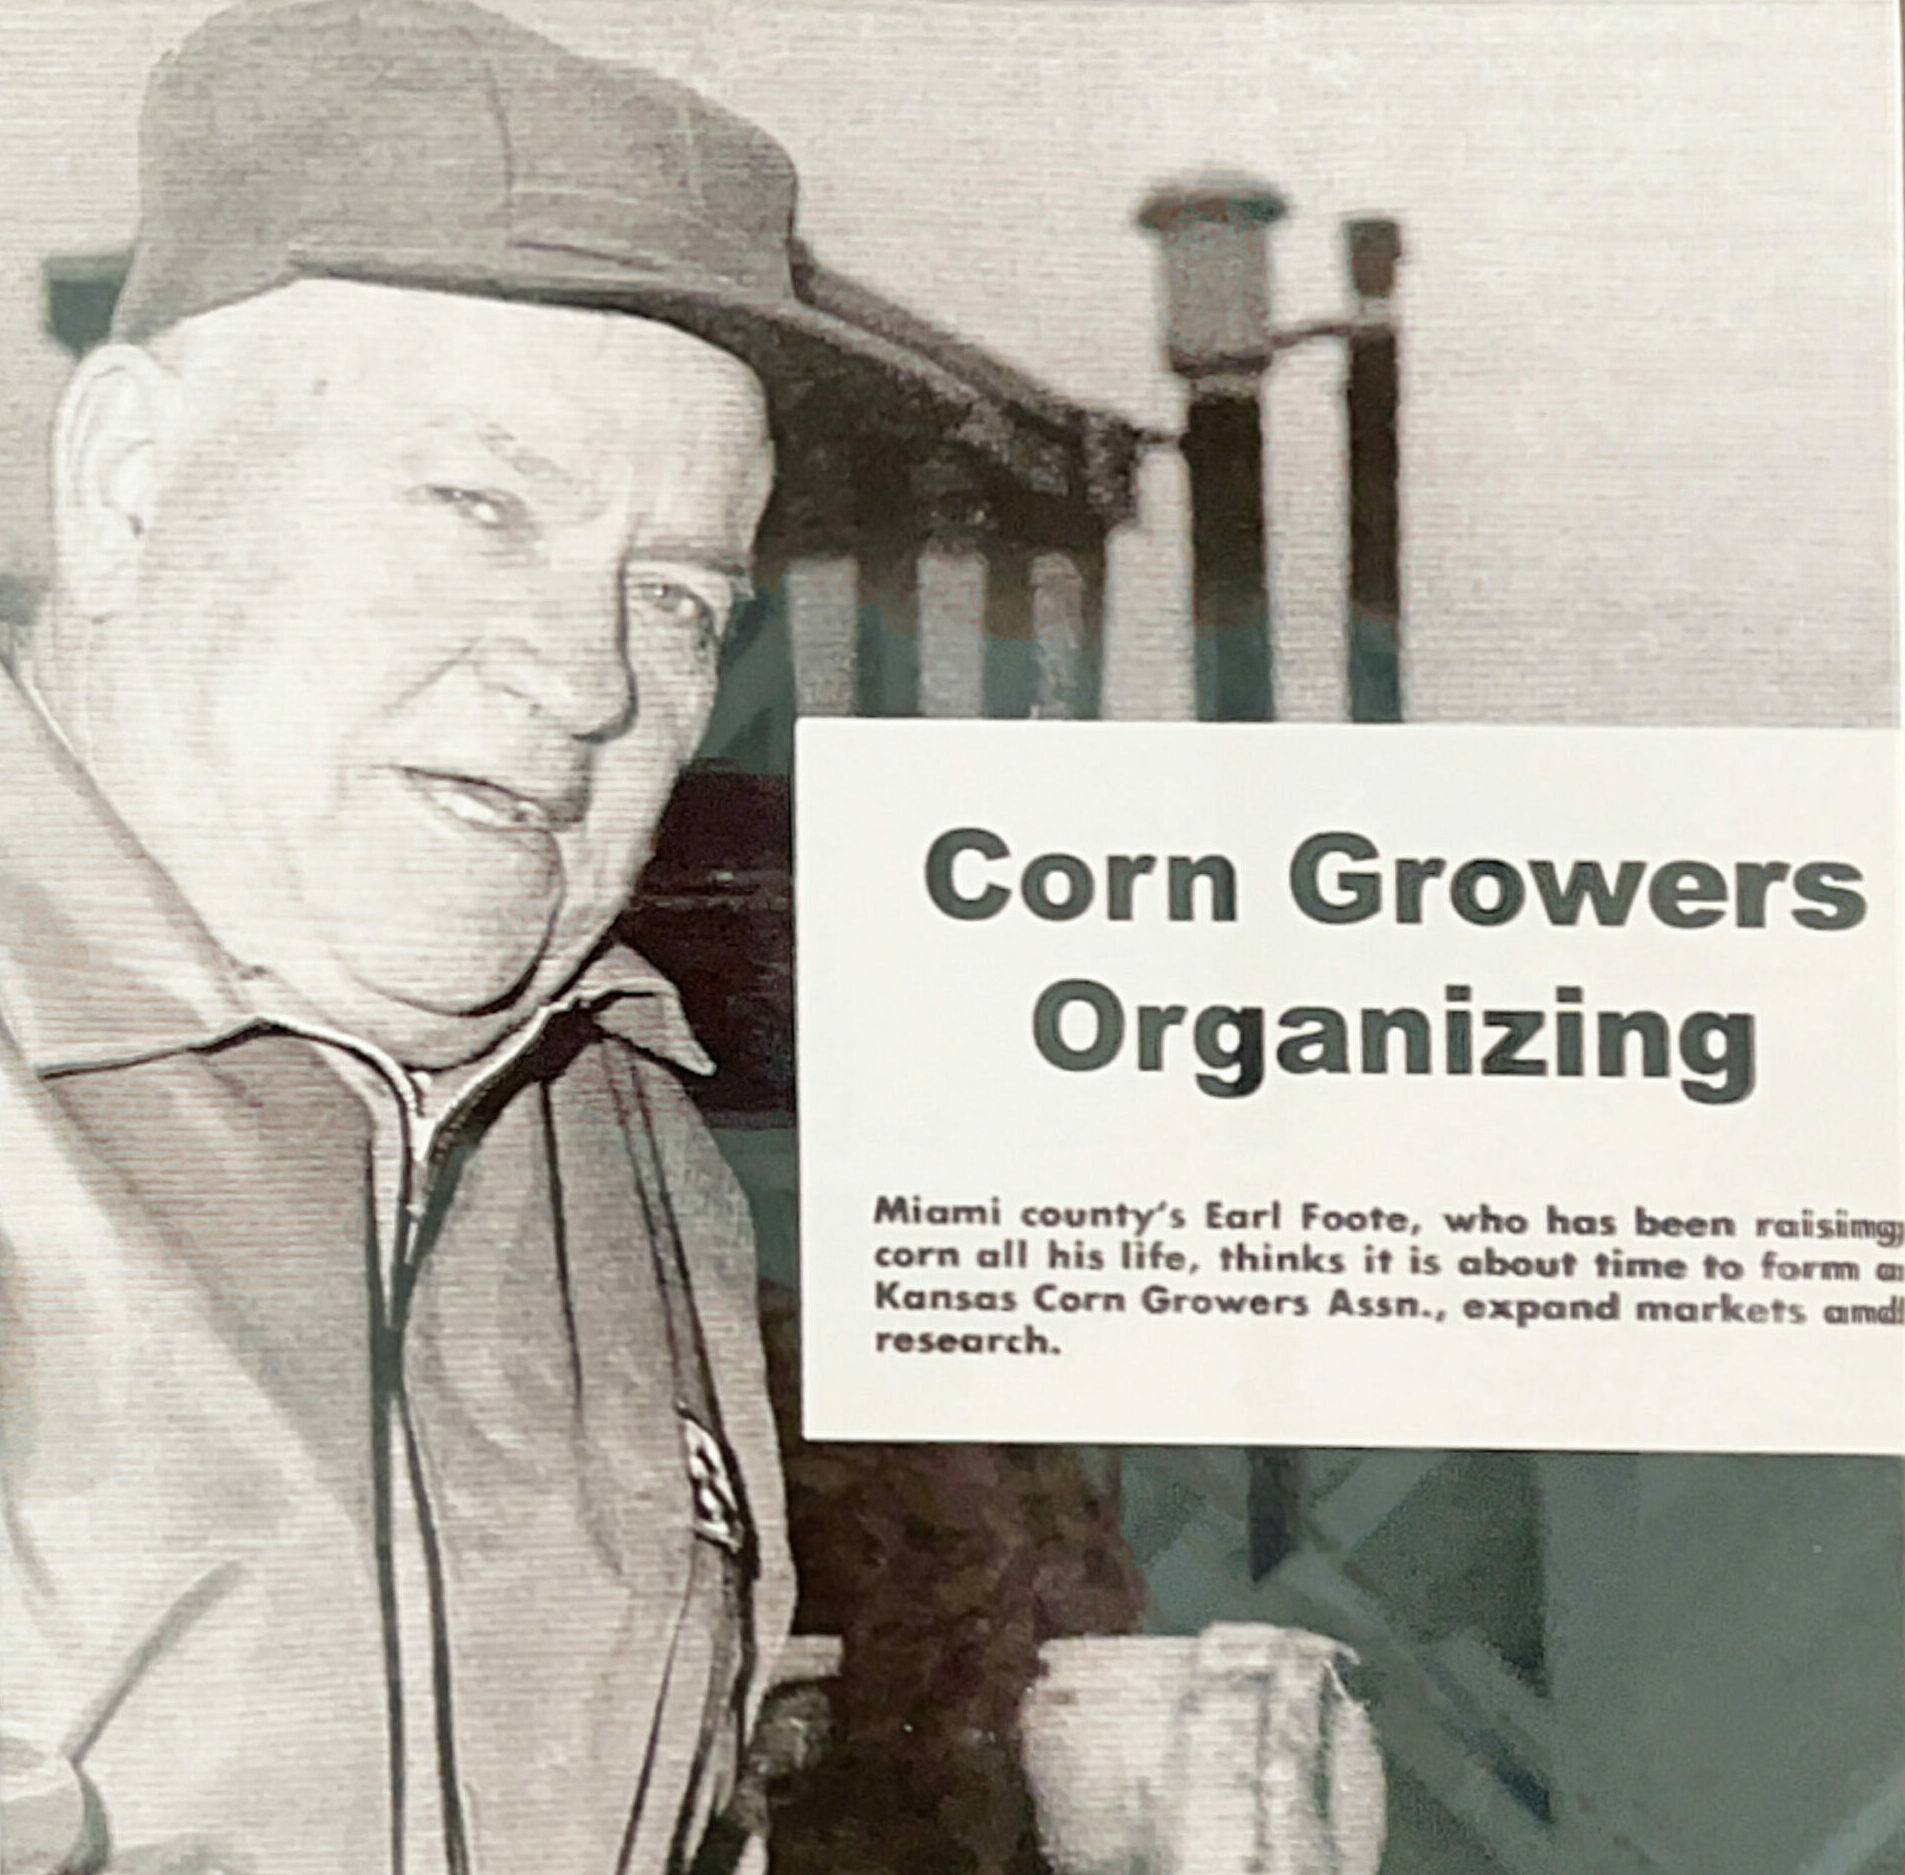 news clipping of Earl Foote for Corn Growers Organizing